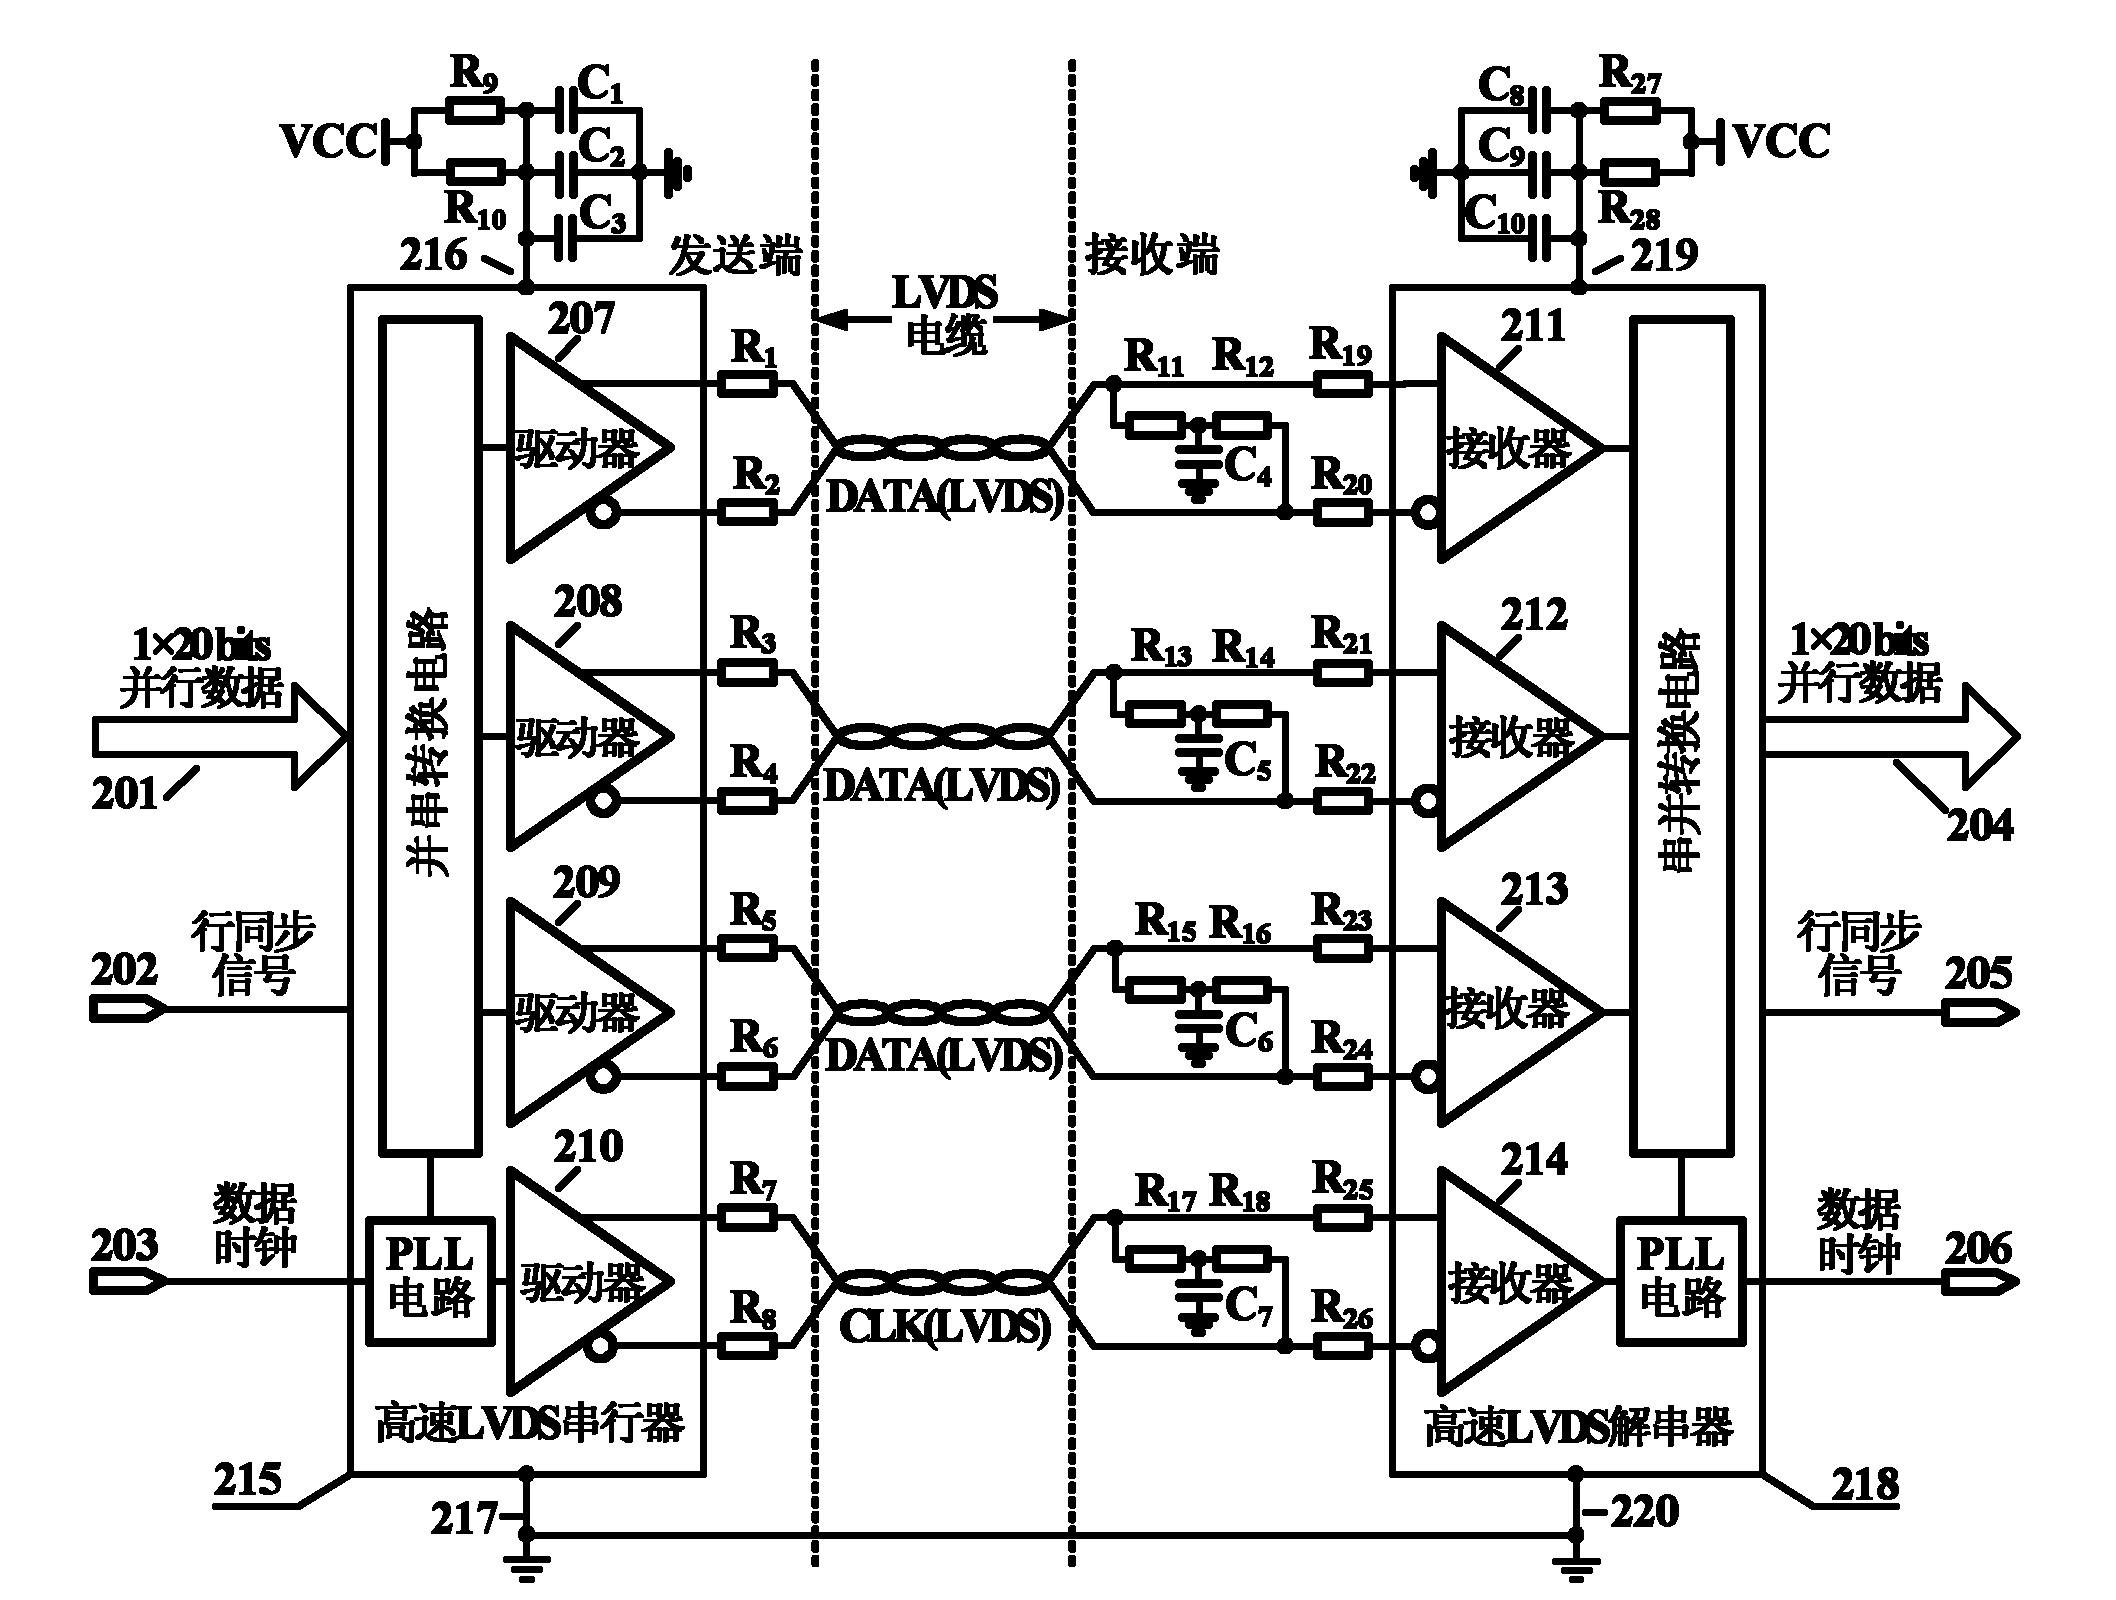 Image data transmission circuit of satellite-borne high-resolution CCD (Charge Coupled Device) camera